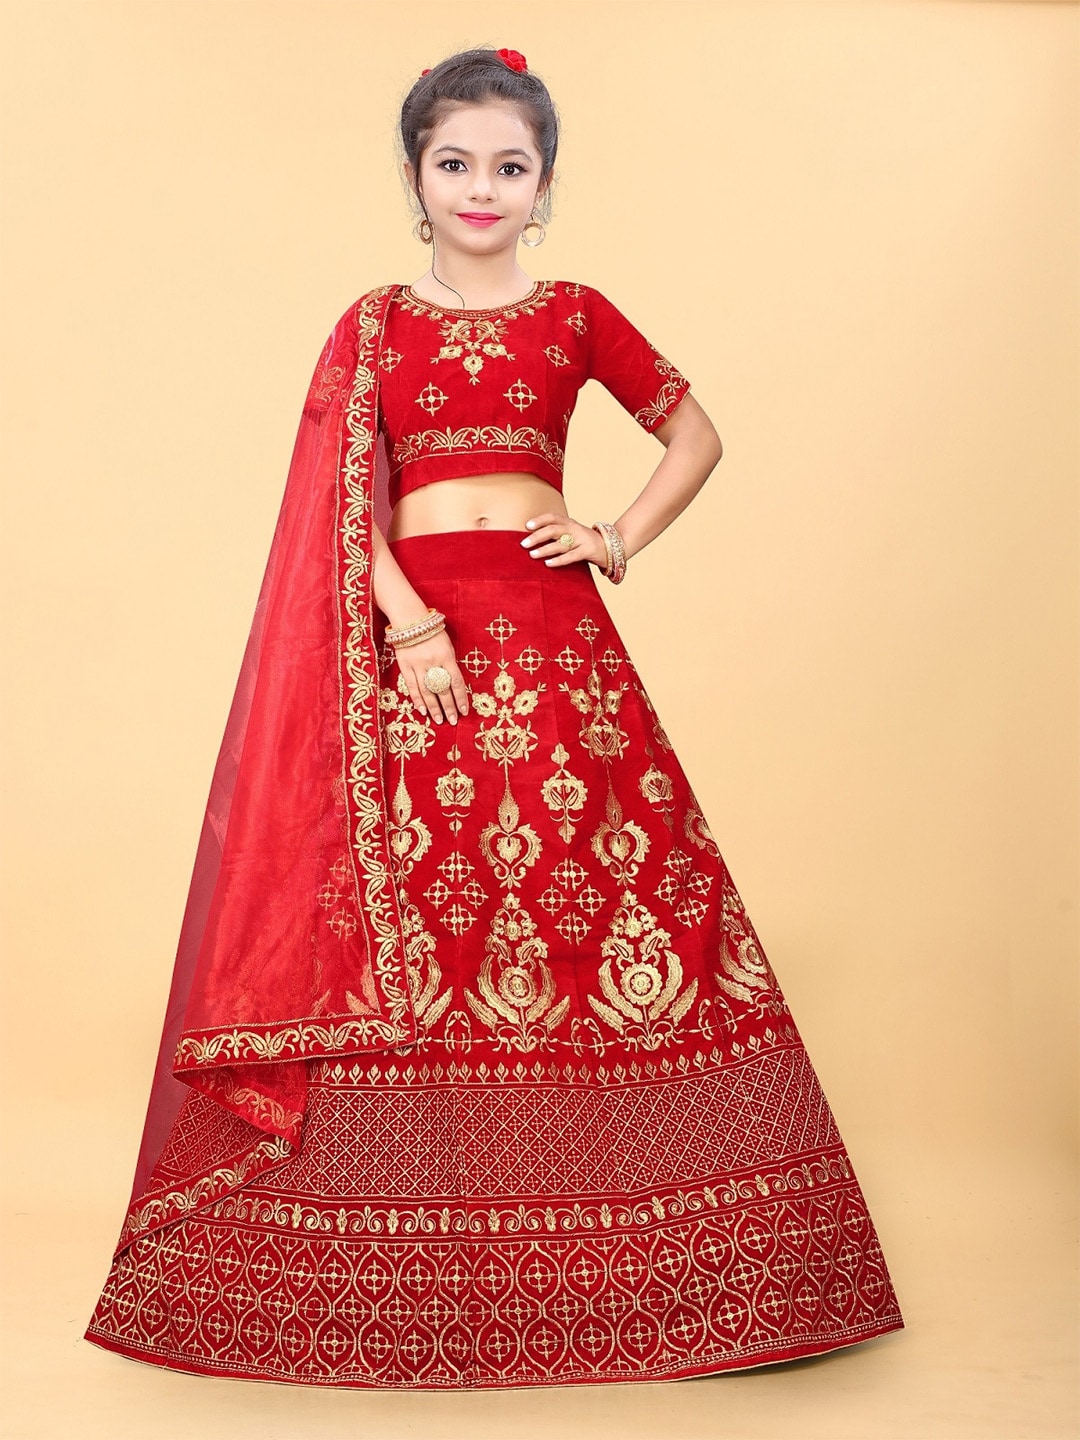 APNISHA Girls Red & Gold-Toned Embroidered Semi-Stitched Lehenga & Unstitched Blouse With Dupatta Price in India